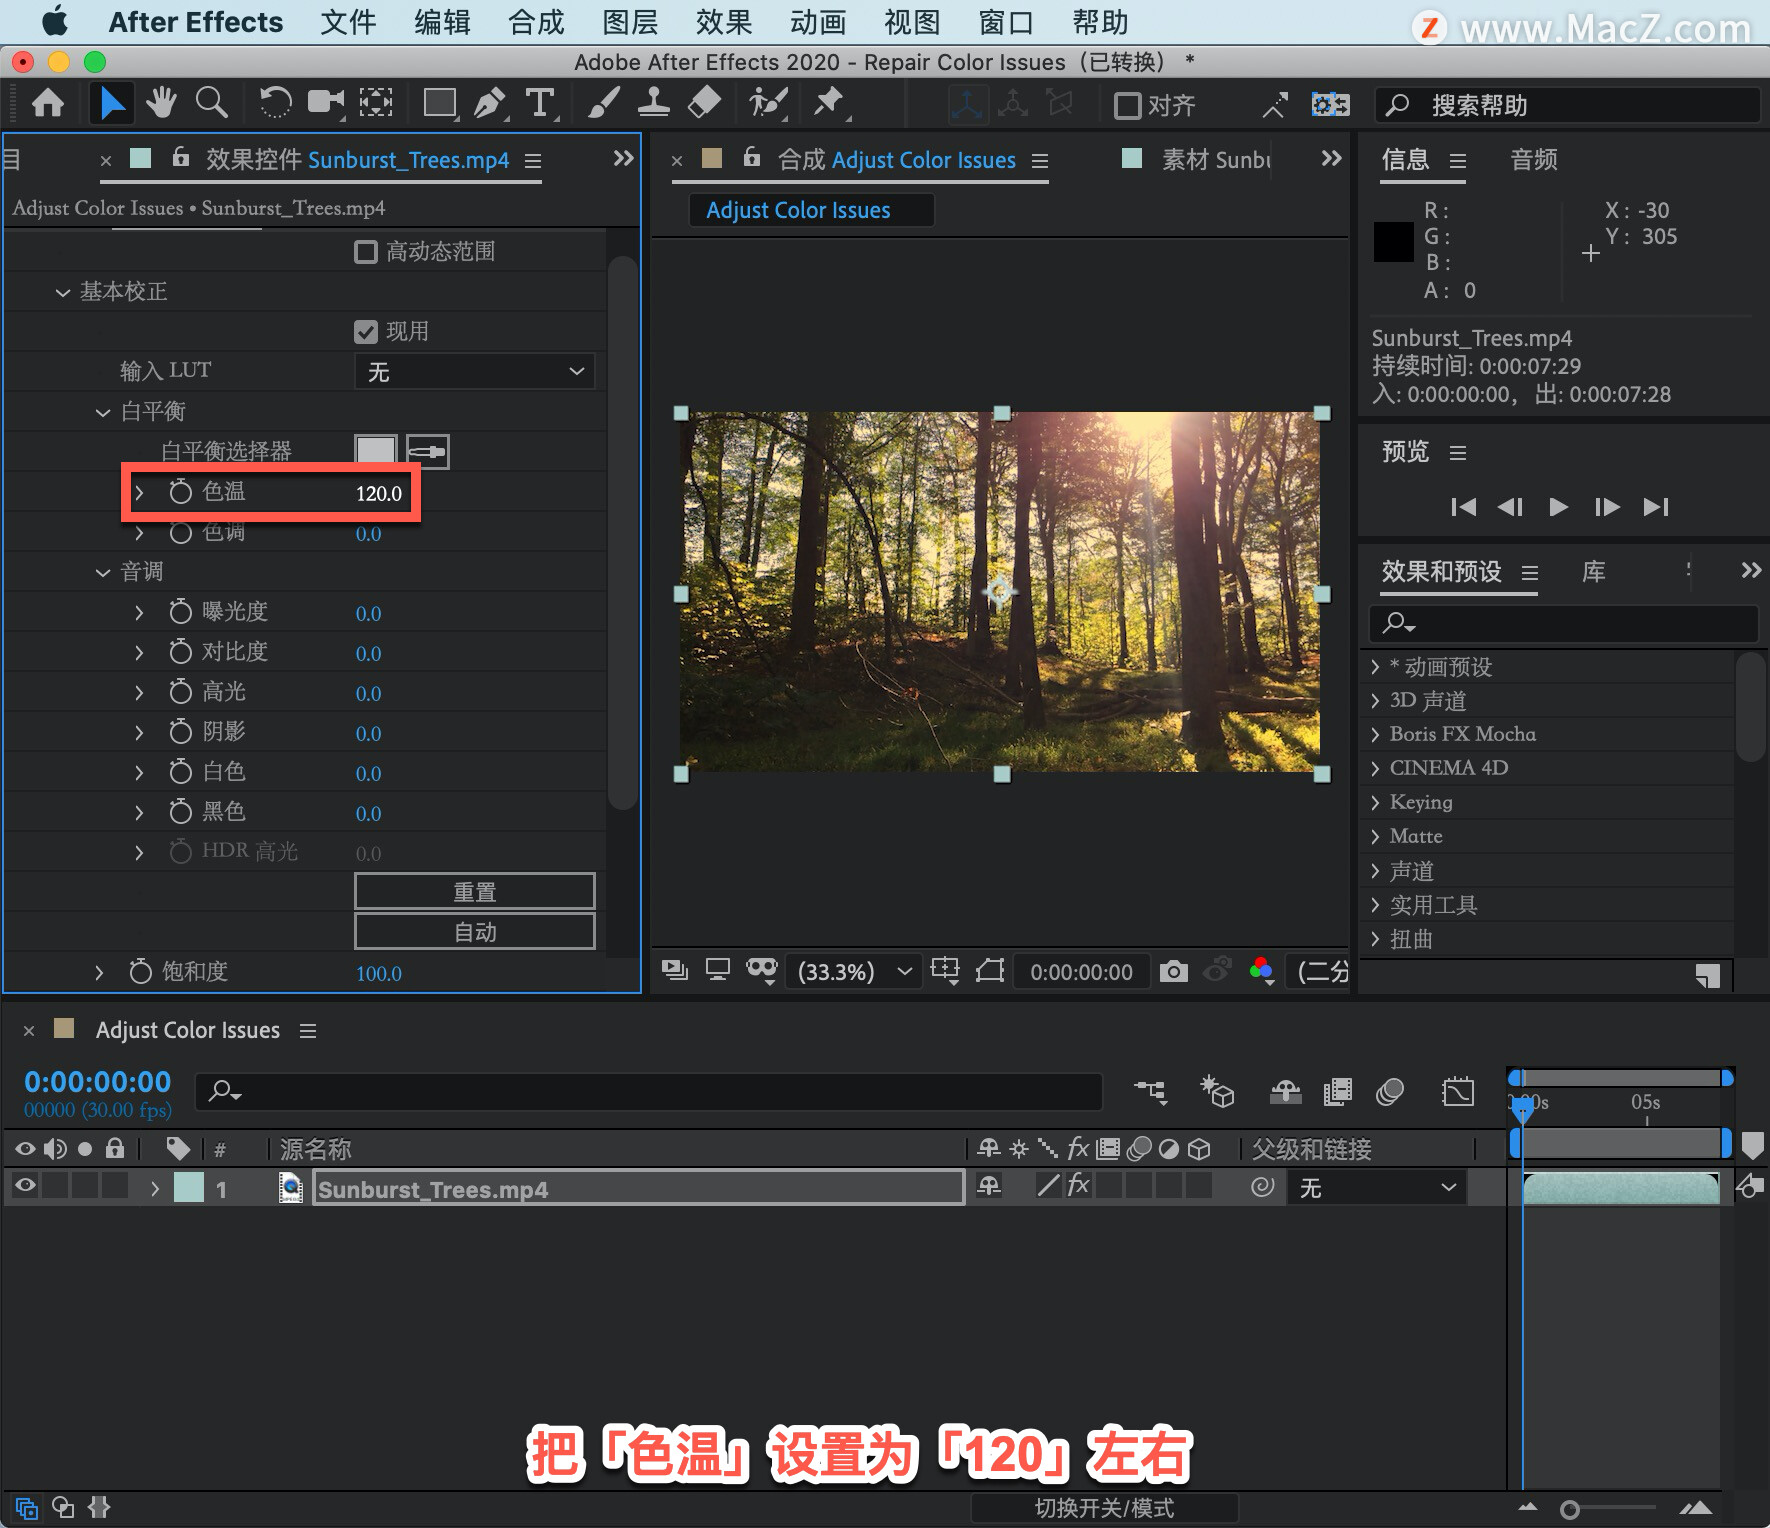 After Effects 教程「23」，如何在 After Effects 中增强视频中的颜色？